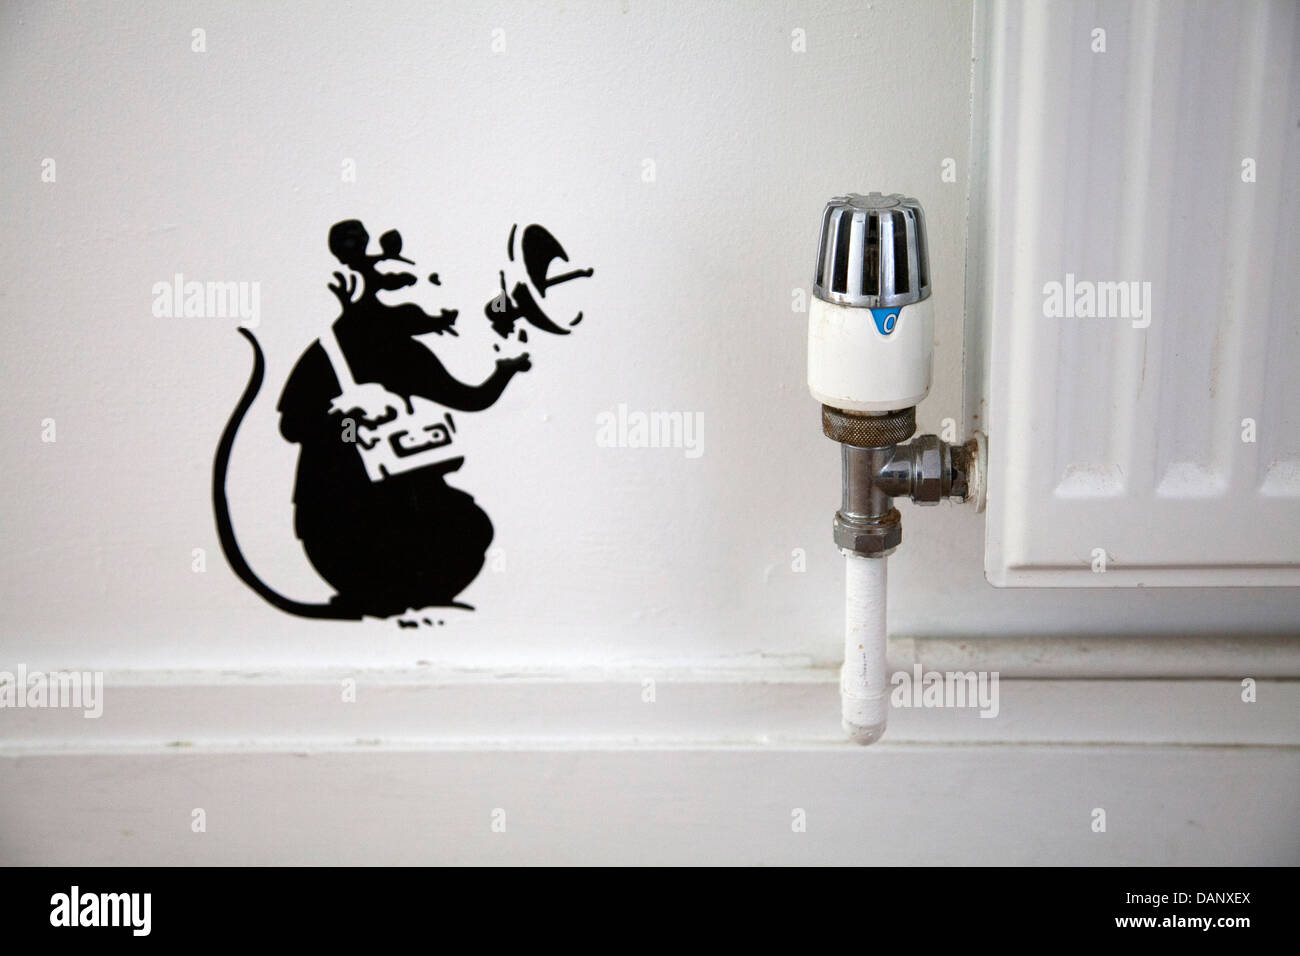 Mouse with Sound Detector Graffiti Stencil in Interior next to Radiator Stock Photo